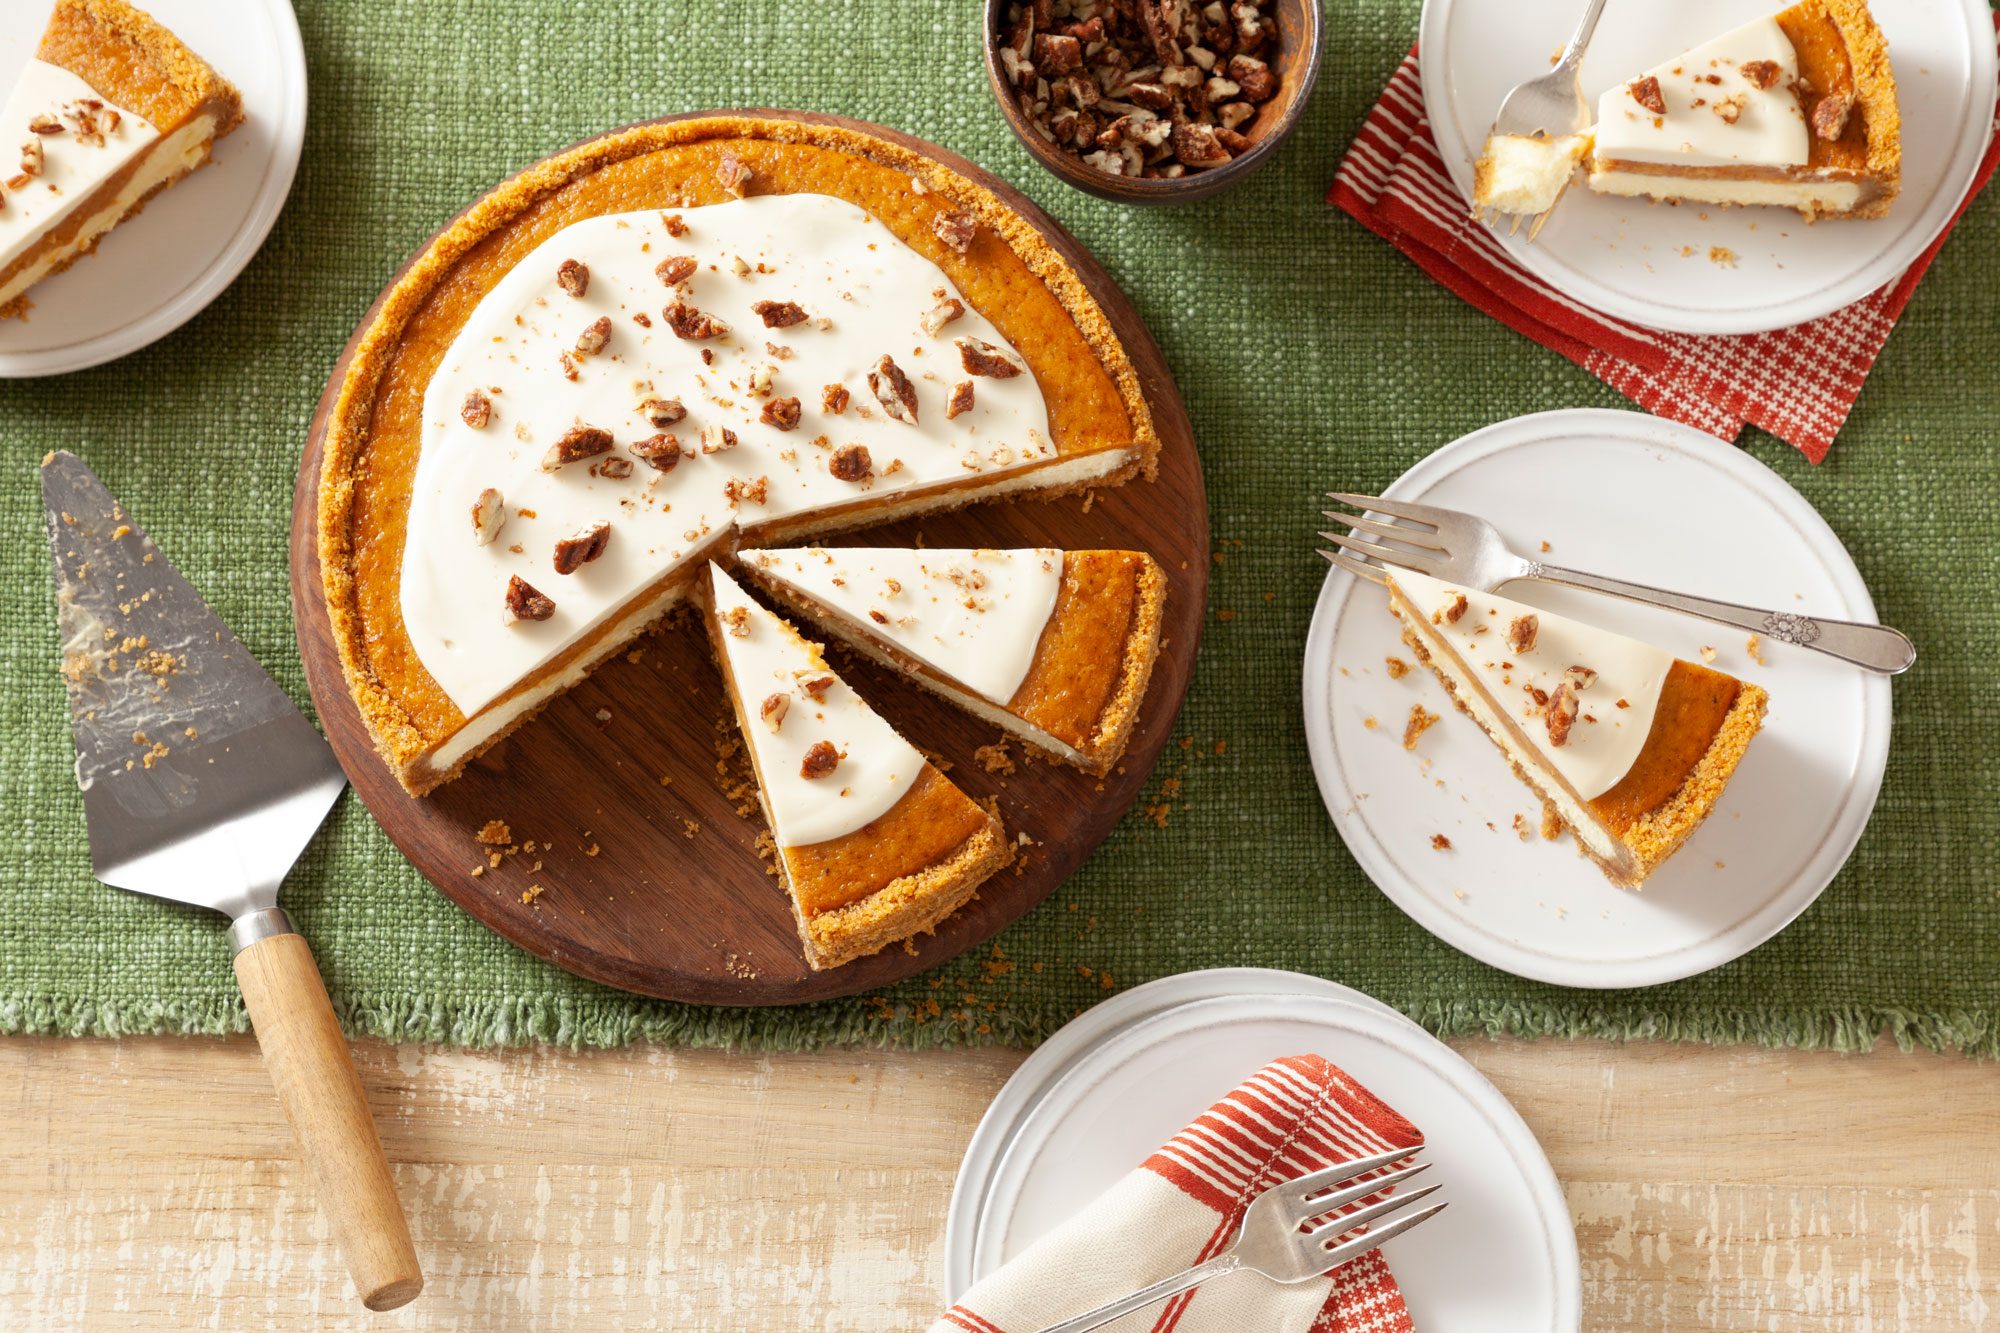 Sweet Potato Cheesecake served in plates